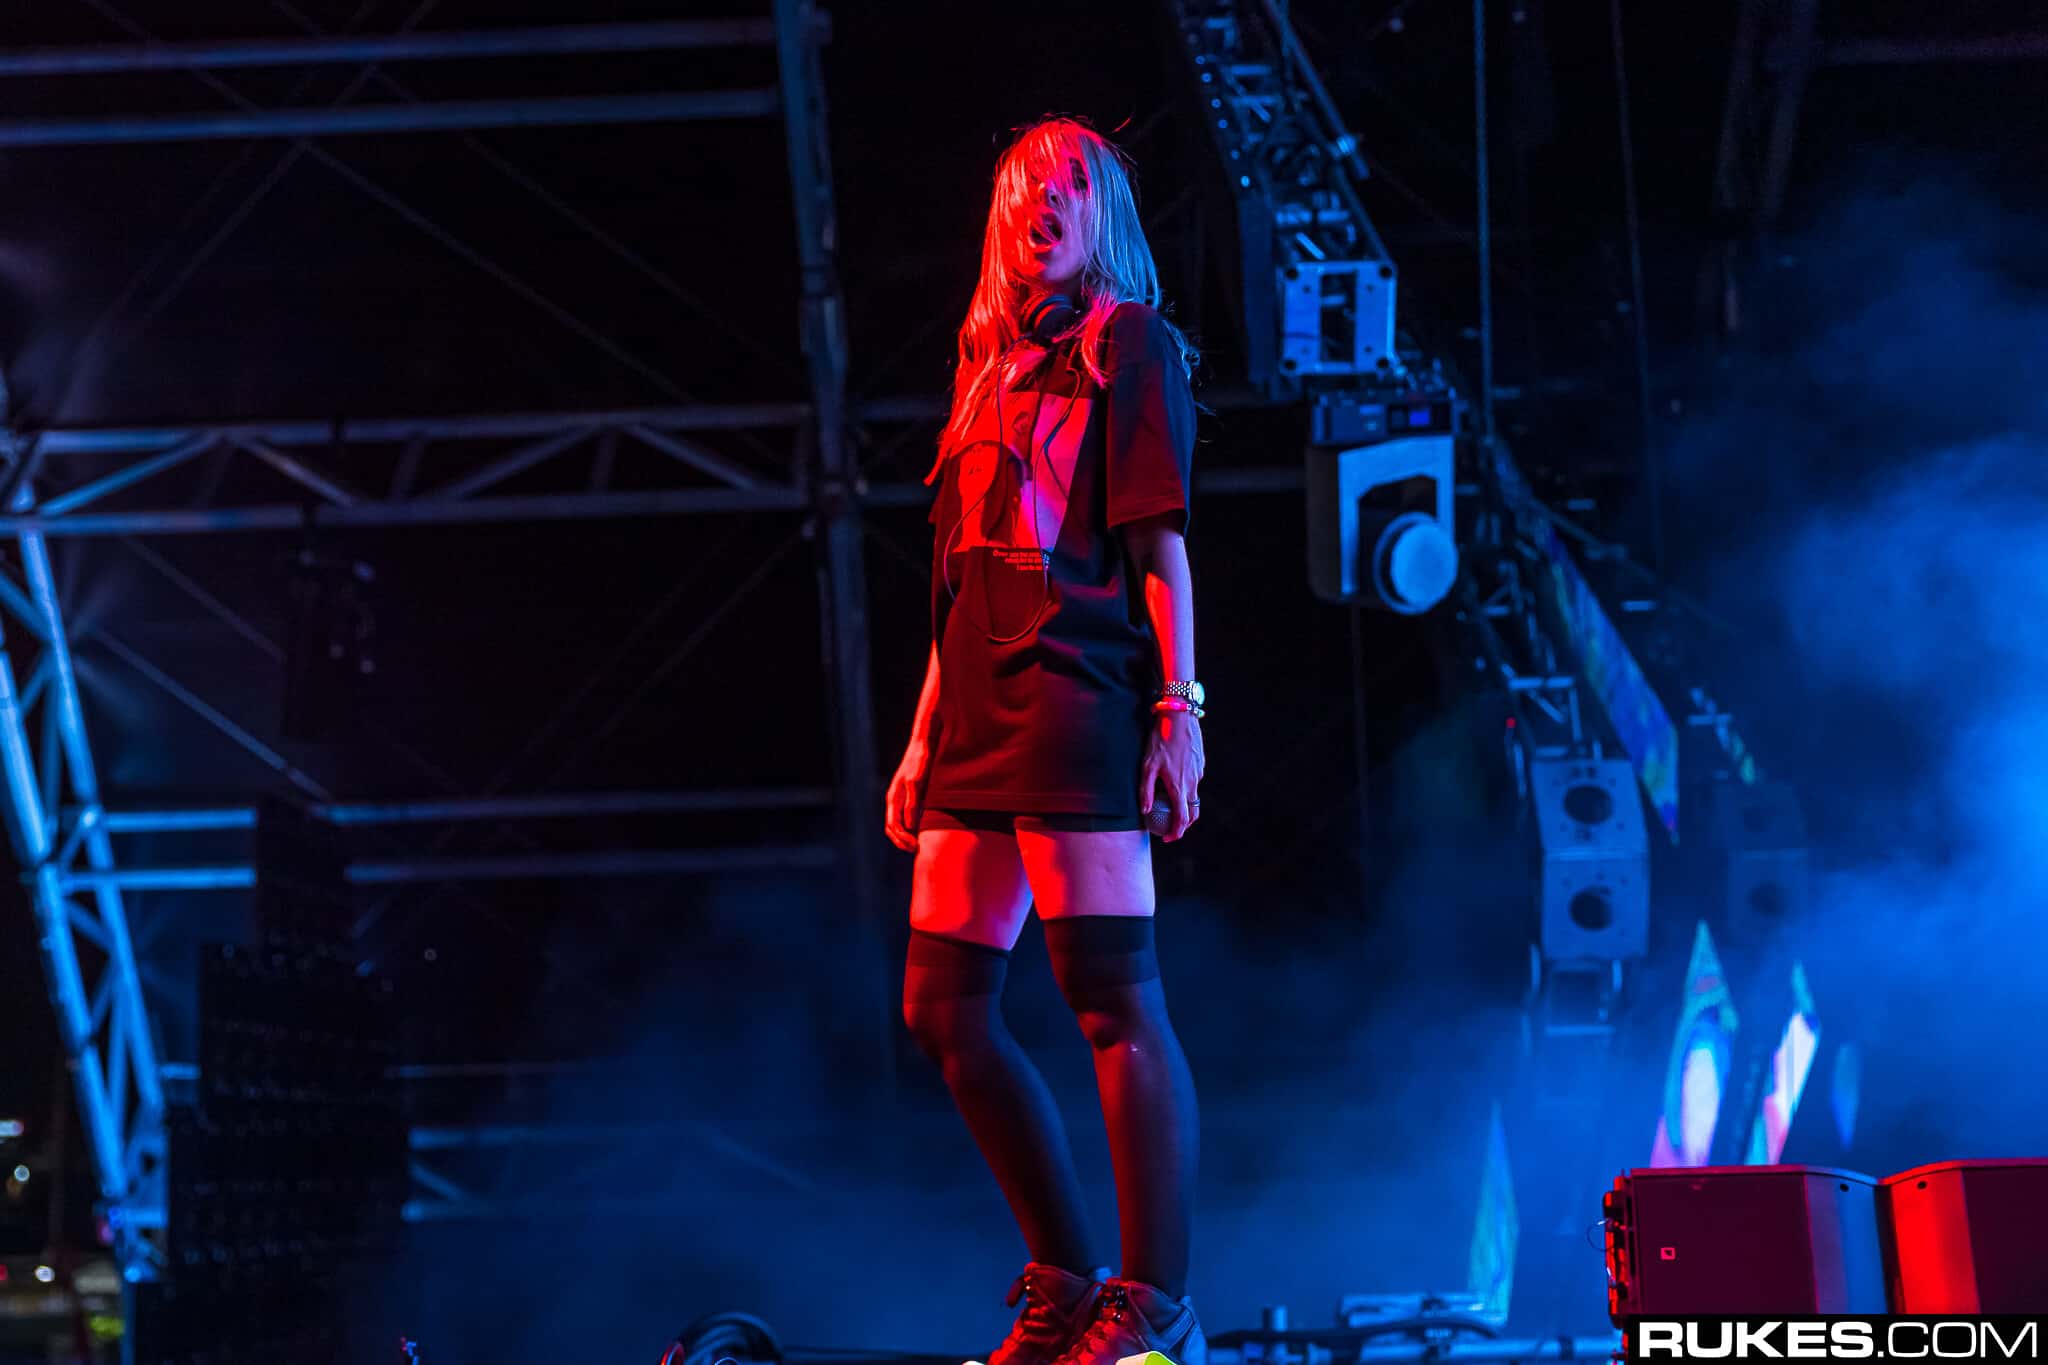 'UNDERPLAYED' documentary is officially released featuring Alison Wonderland, REZZ, & more